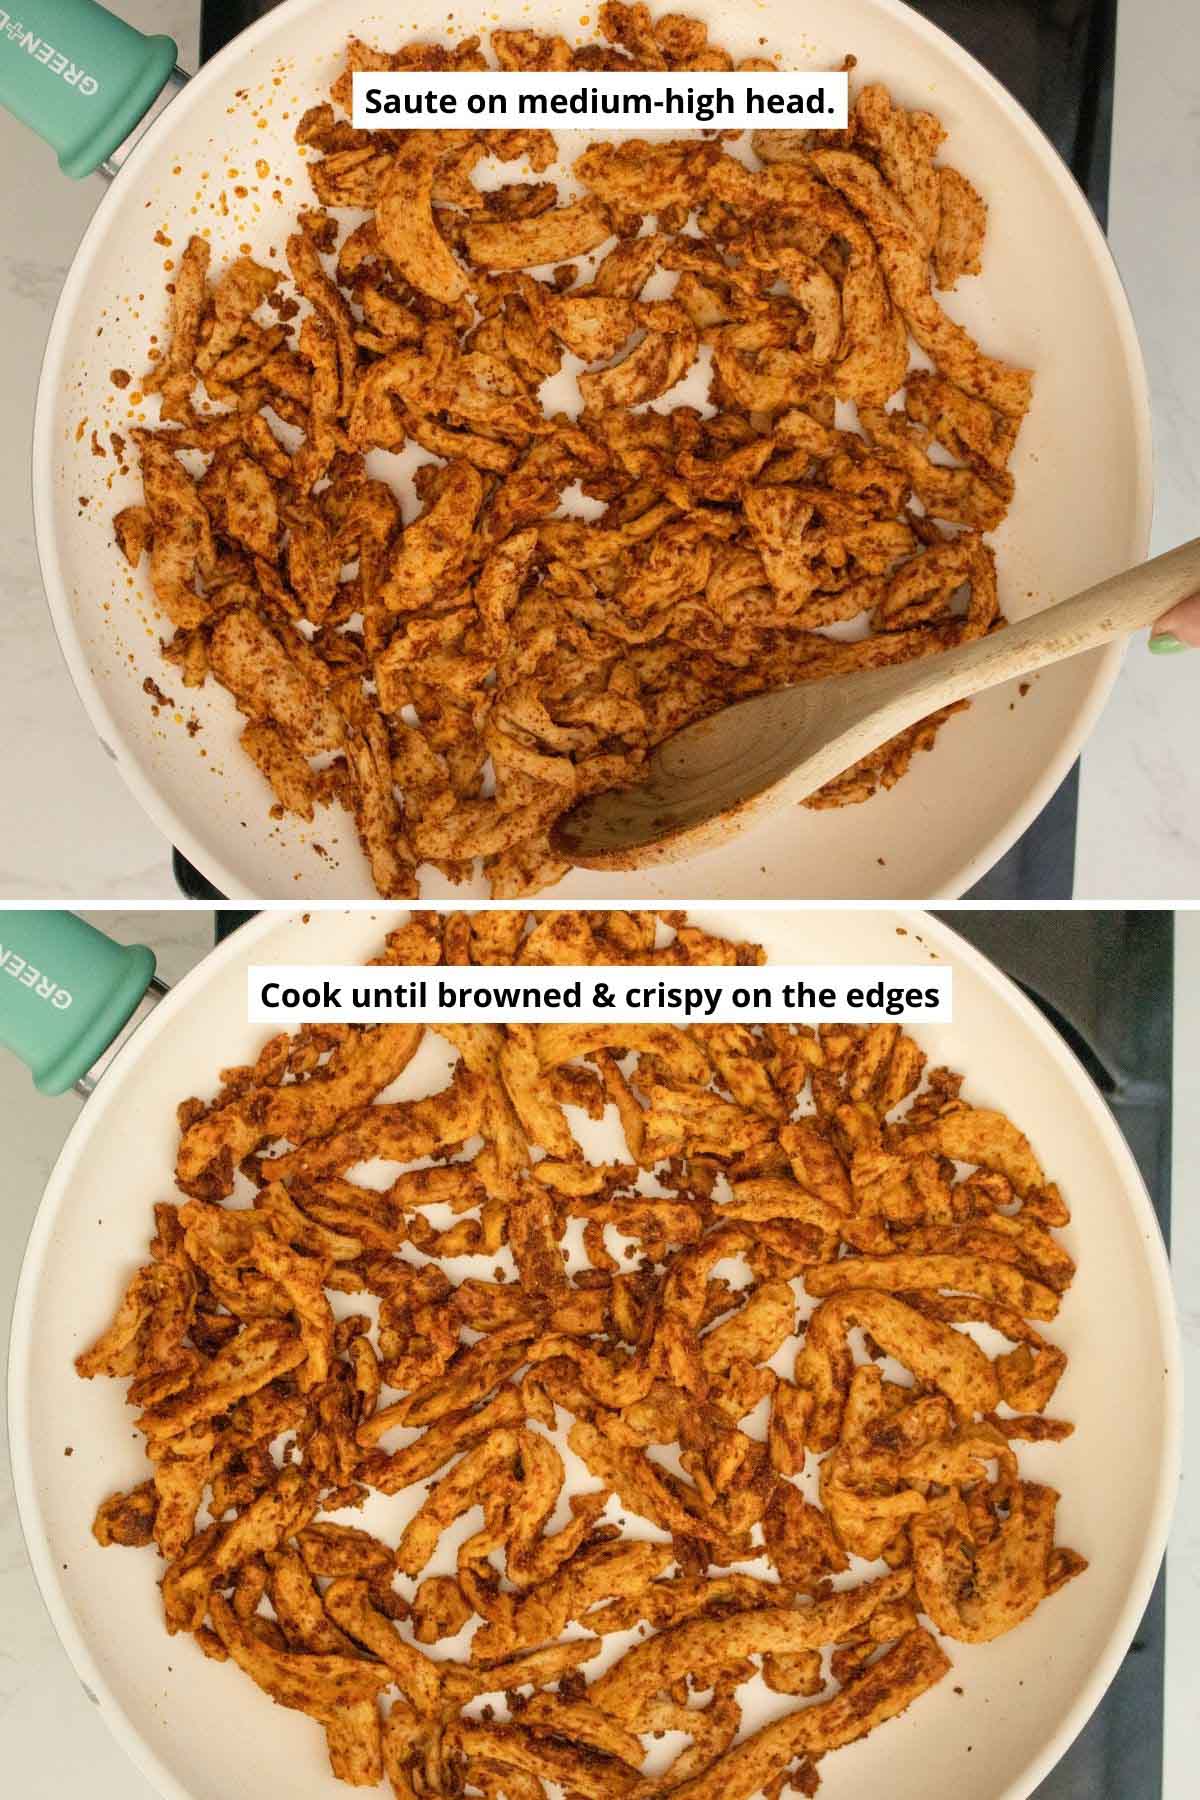 vegan chicken soy curls in the frying pan before and after cooking